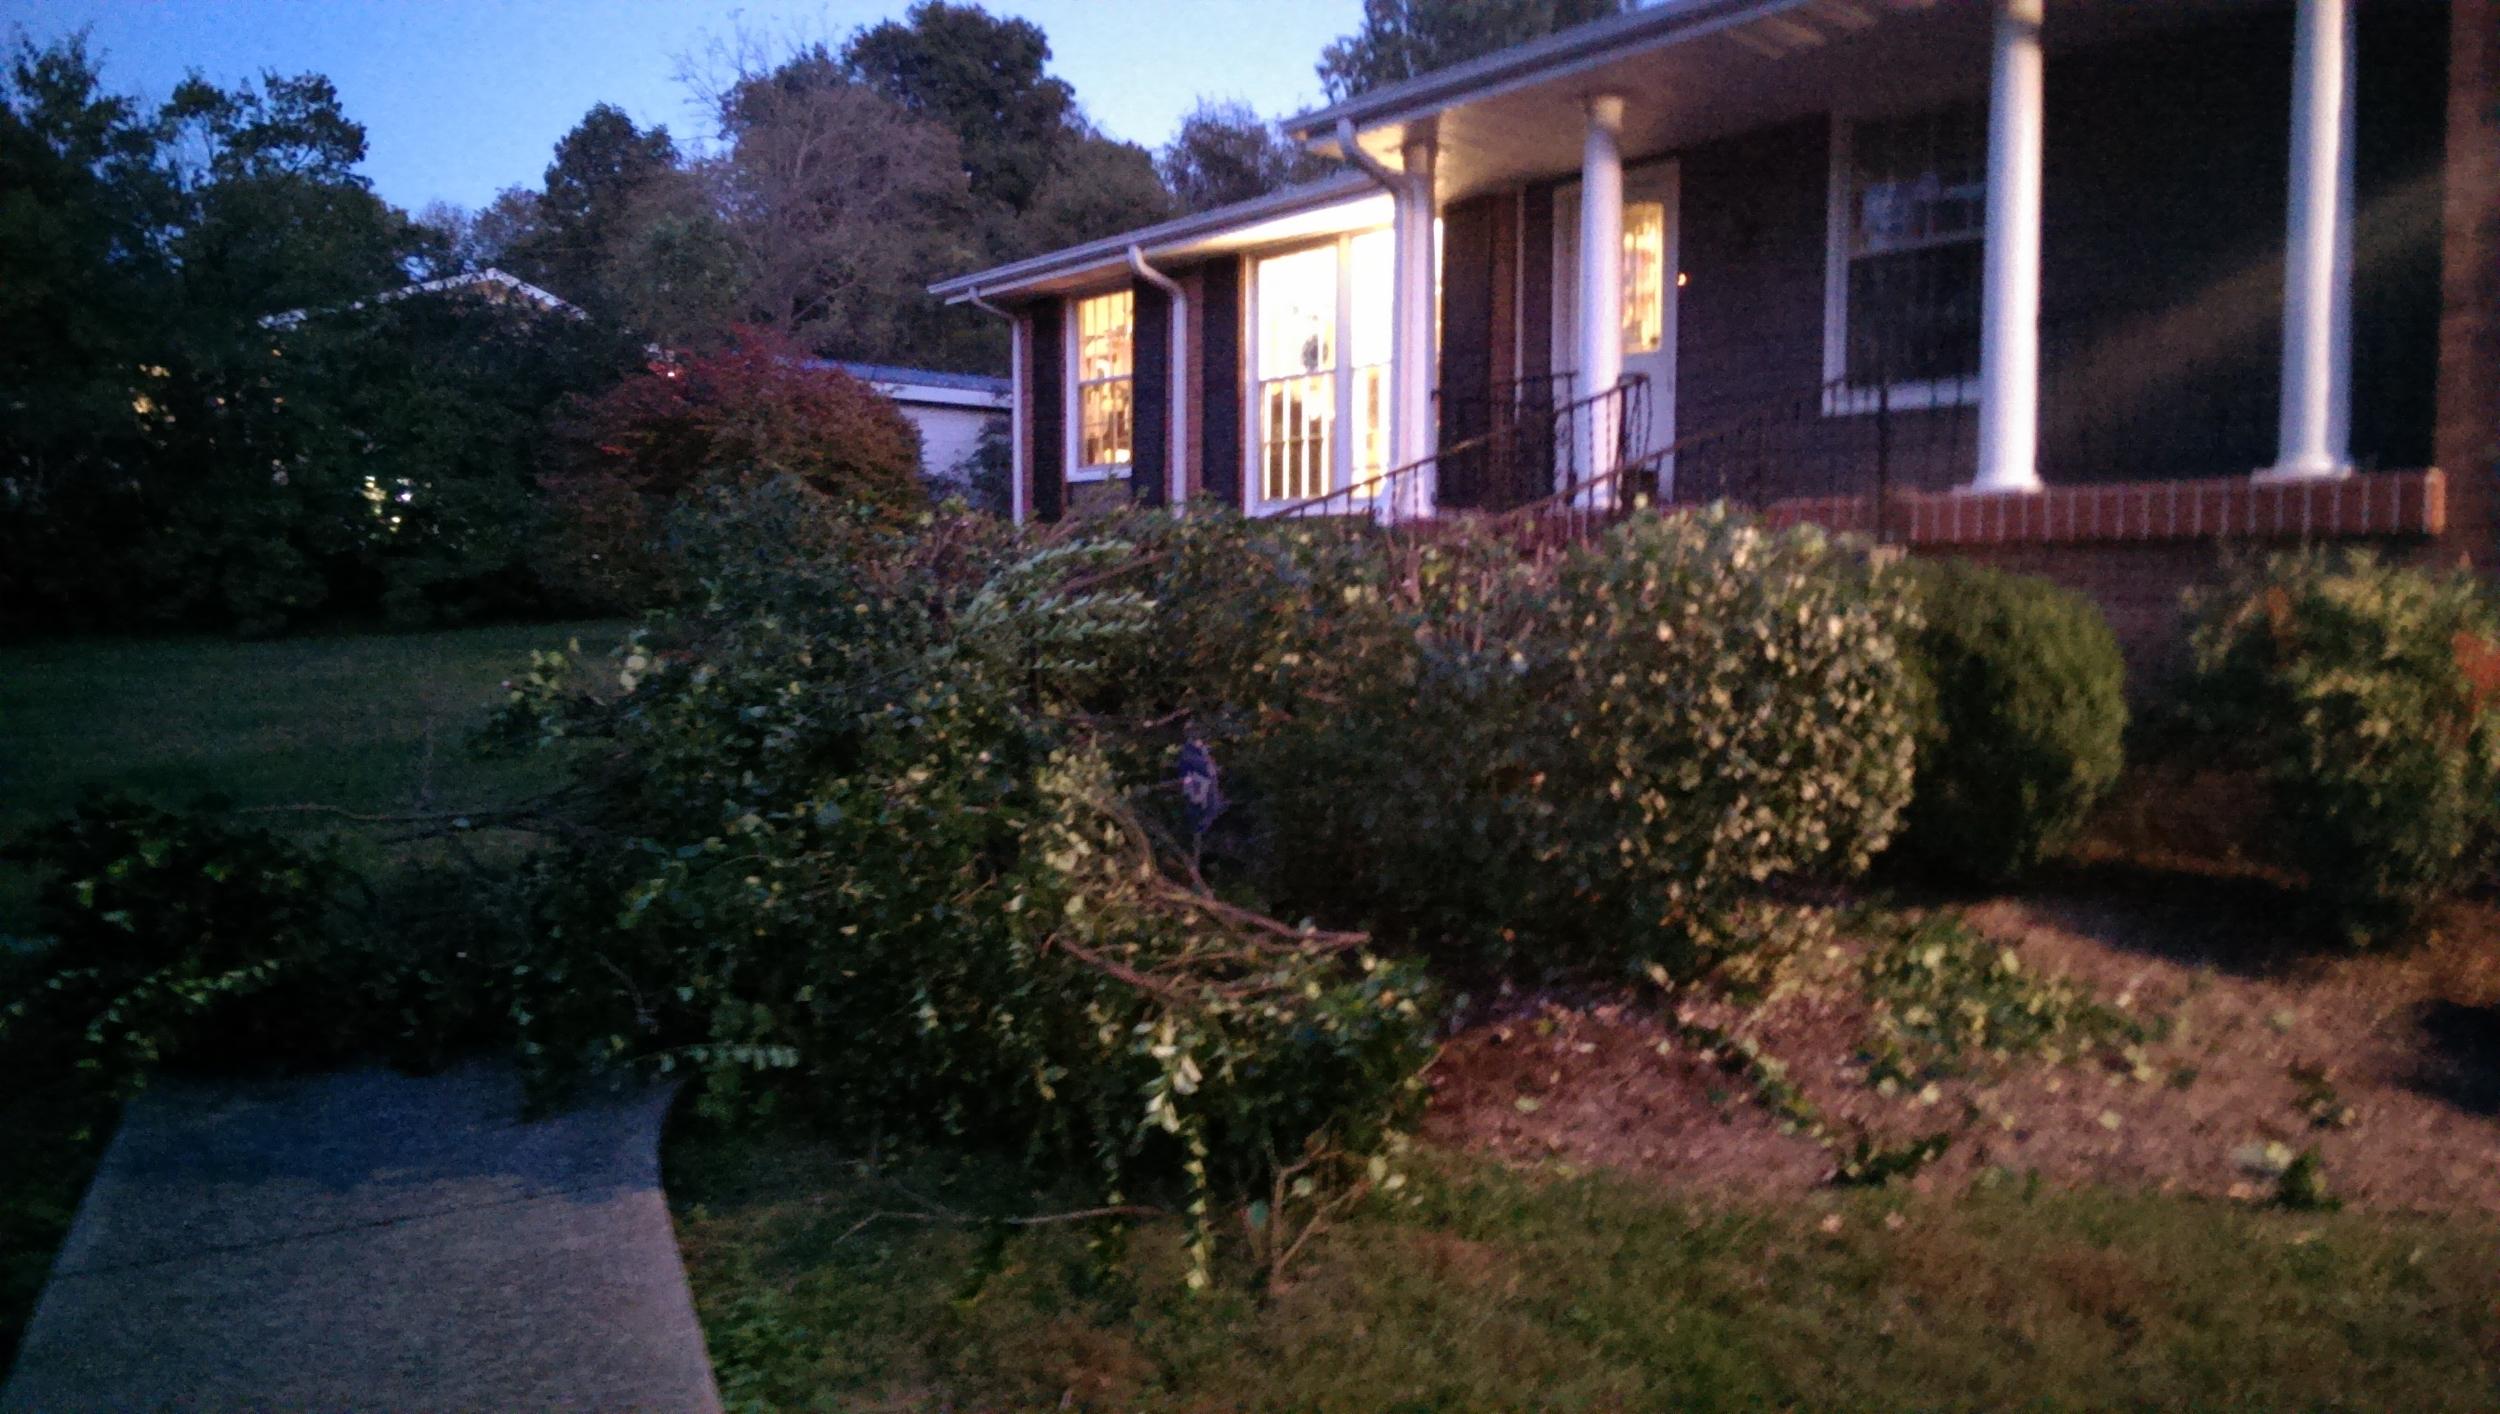 I cut the top off these two shrubs that were hiding the front of the house.